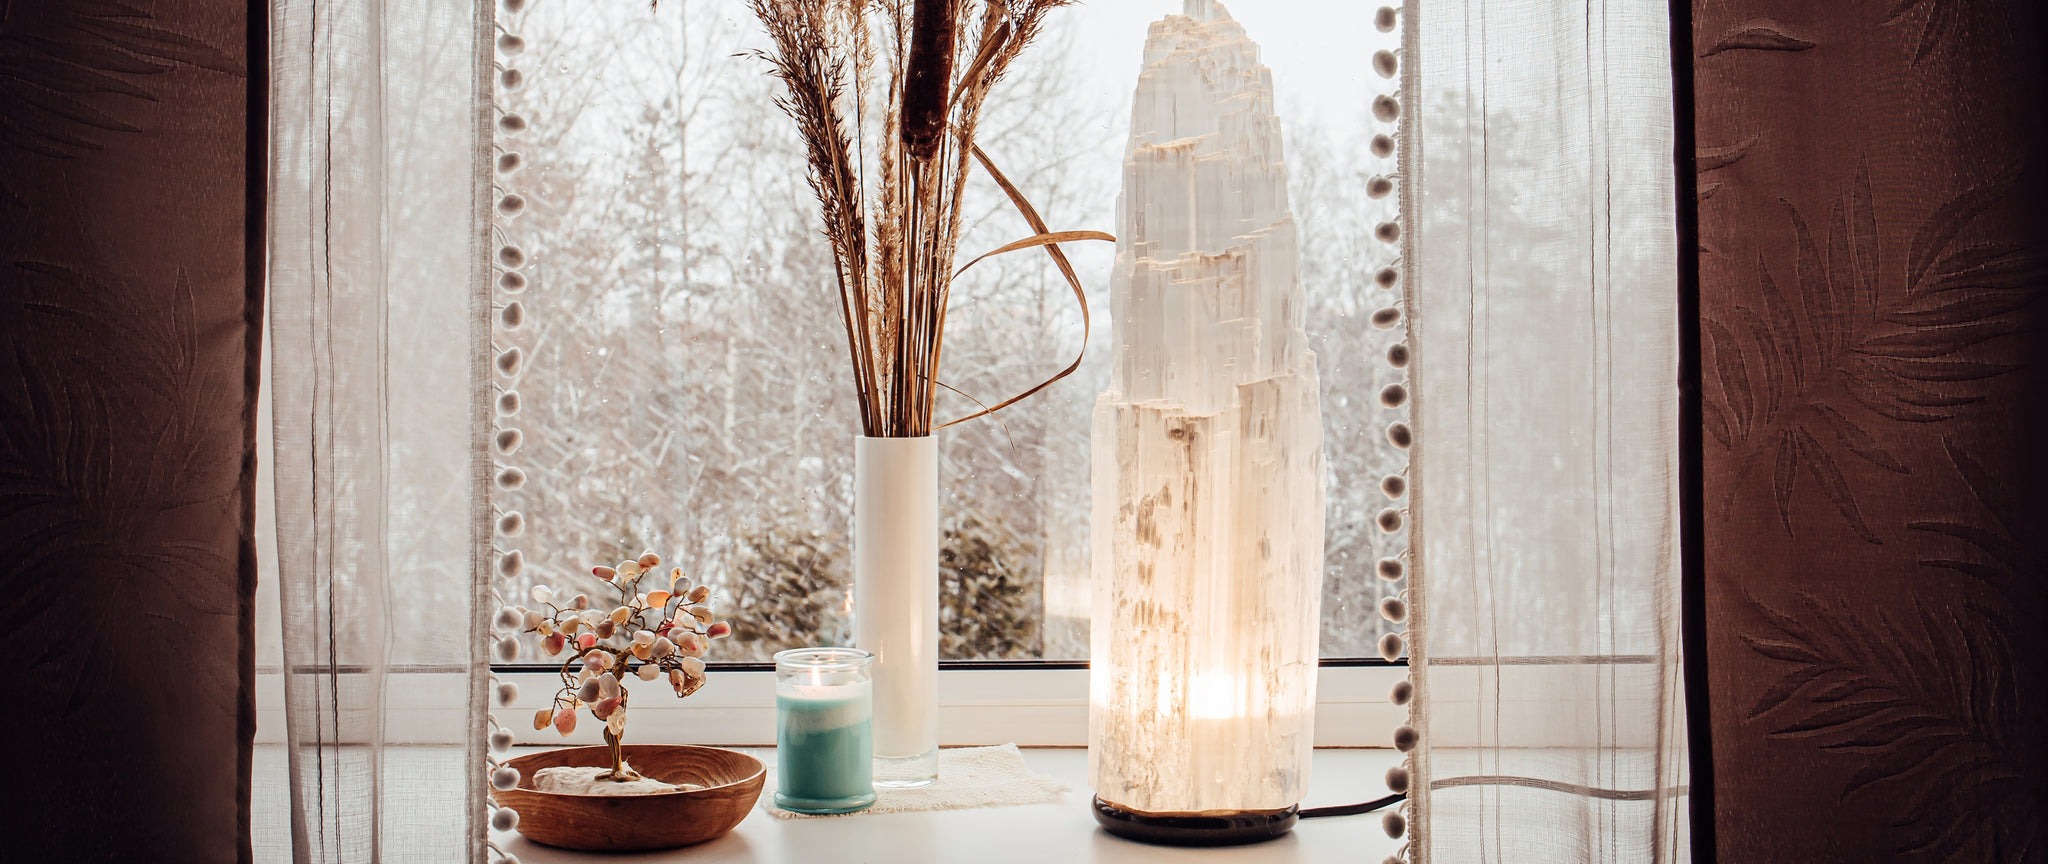 On a windowsill, curtains open, there is a Selenite Lamp, Citrine tree, and potted pampas grass